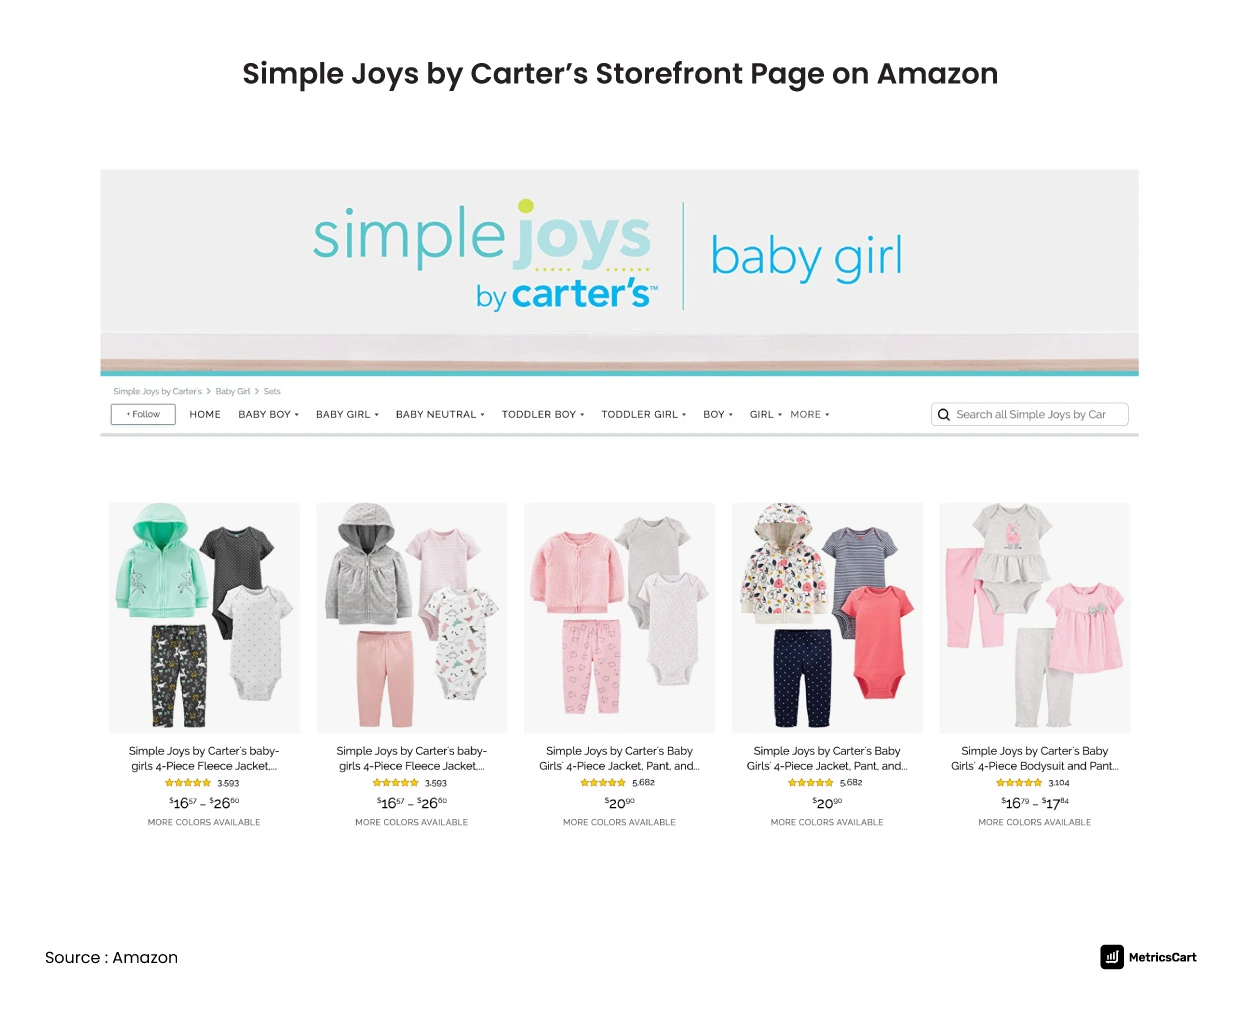 simple joy's by carters storefront page on amazon